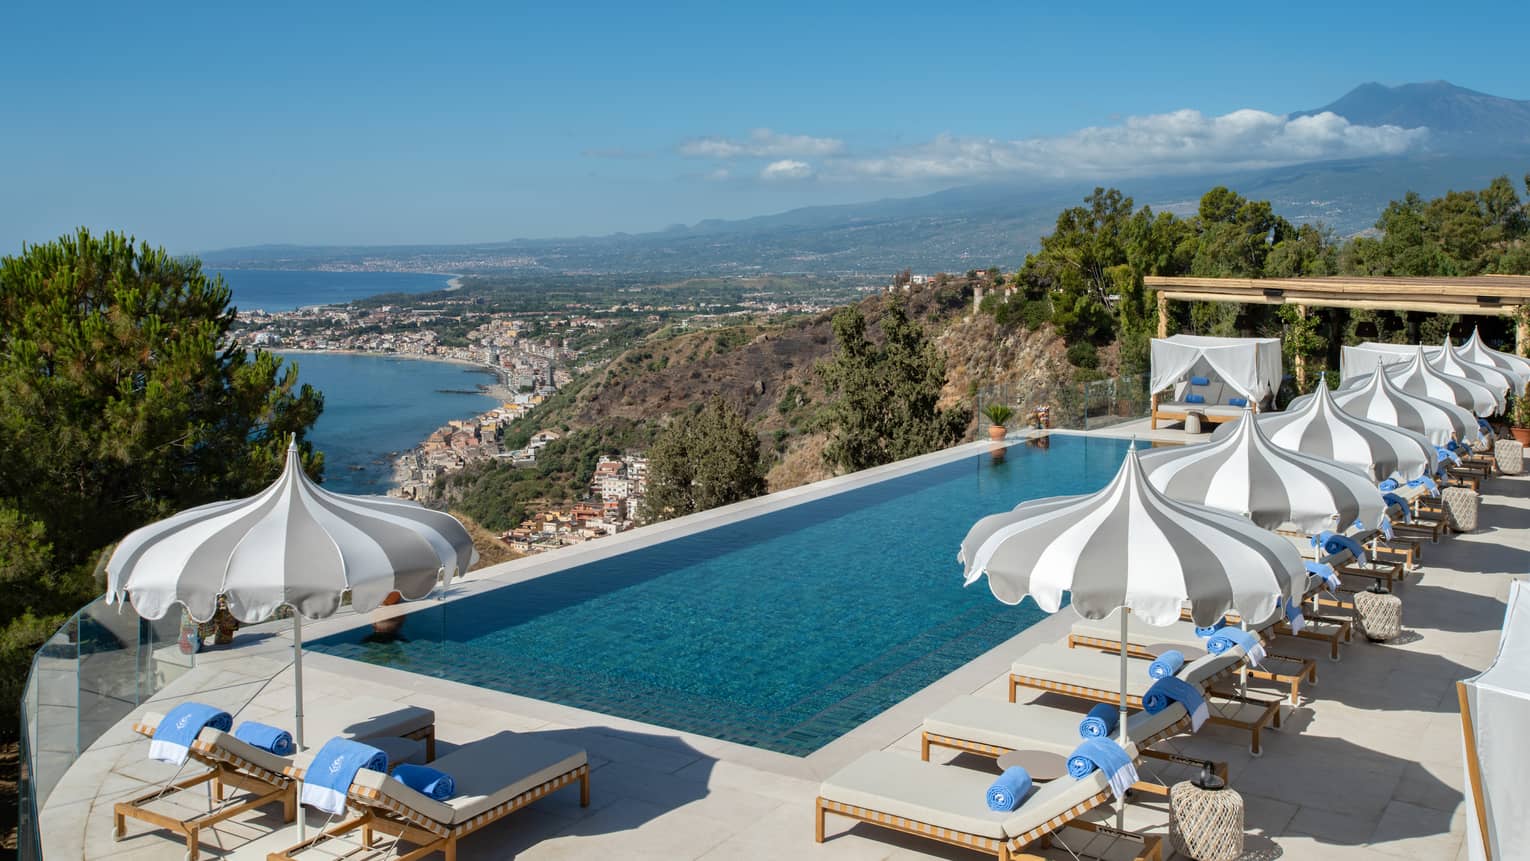 Rectangular pool, lounge chairs and umbrellas overlooking sea and Mount Etna